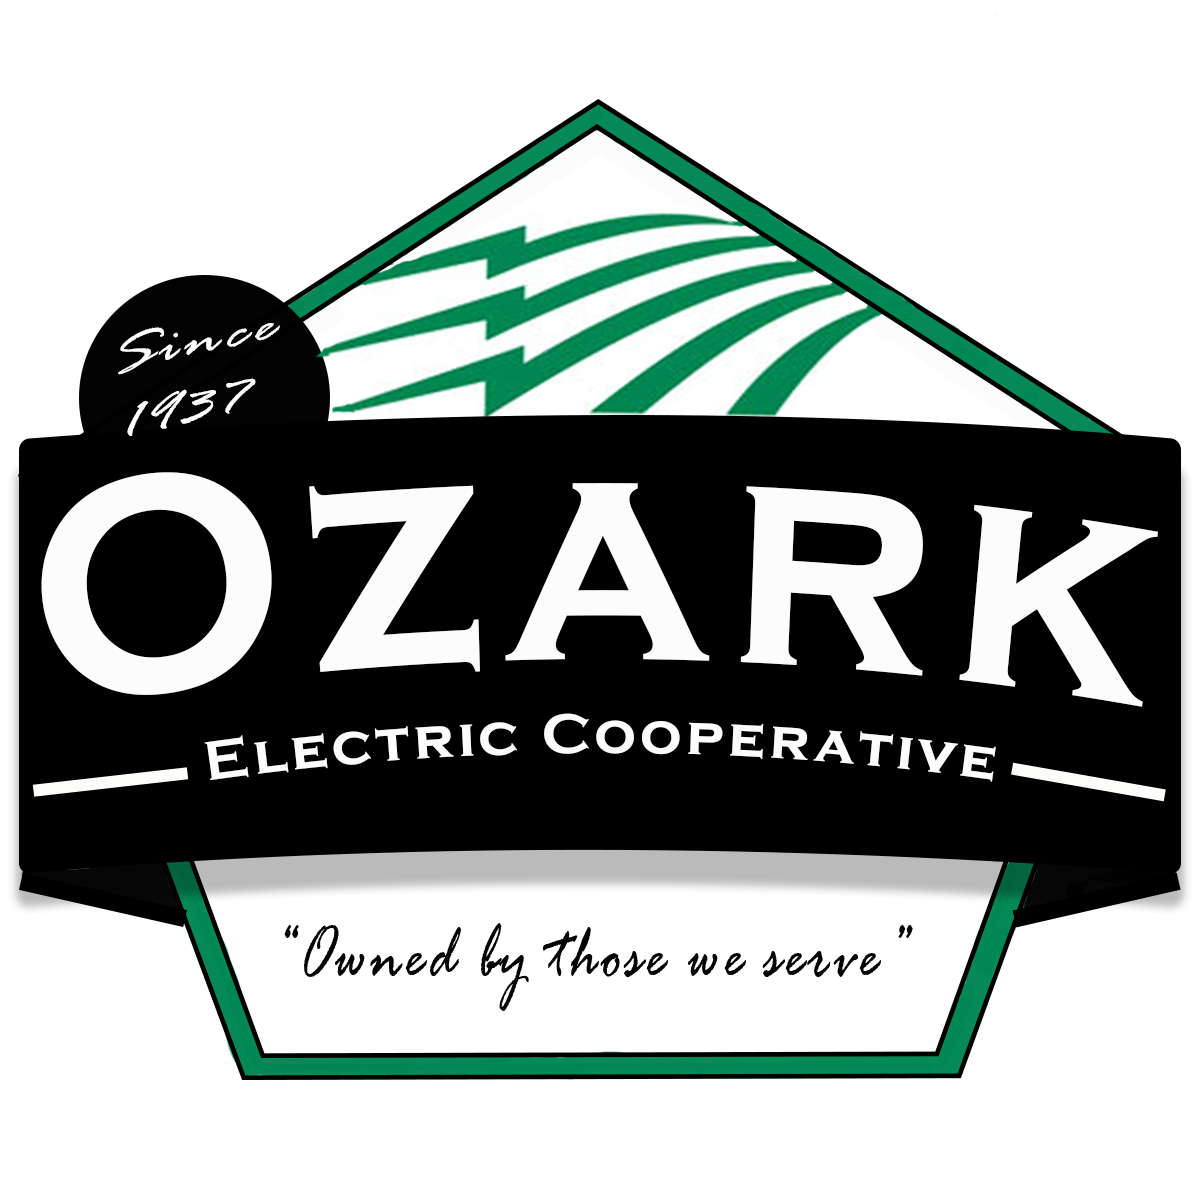 ozarks-electric-cooperative-official-blog